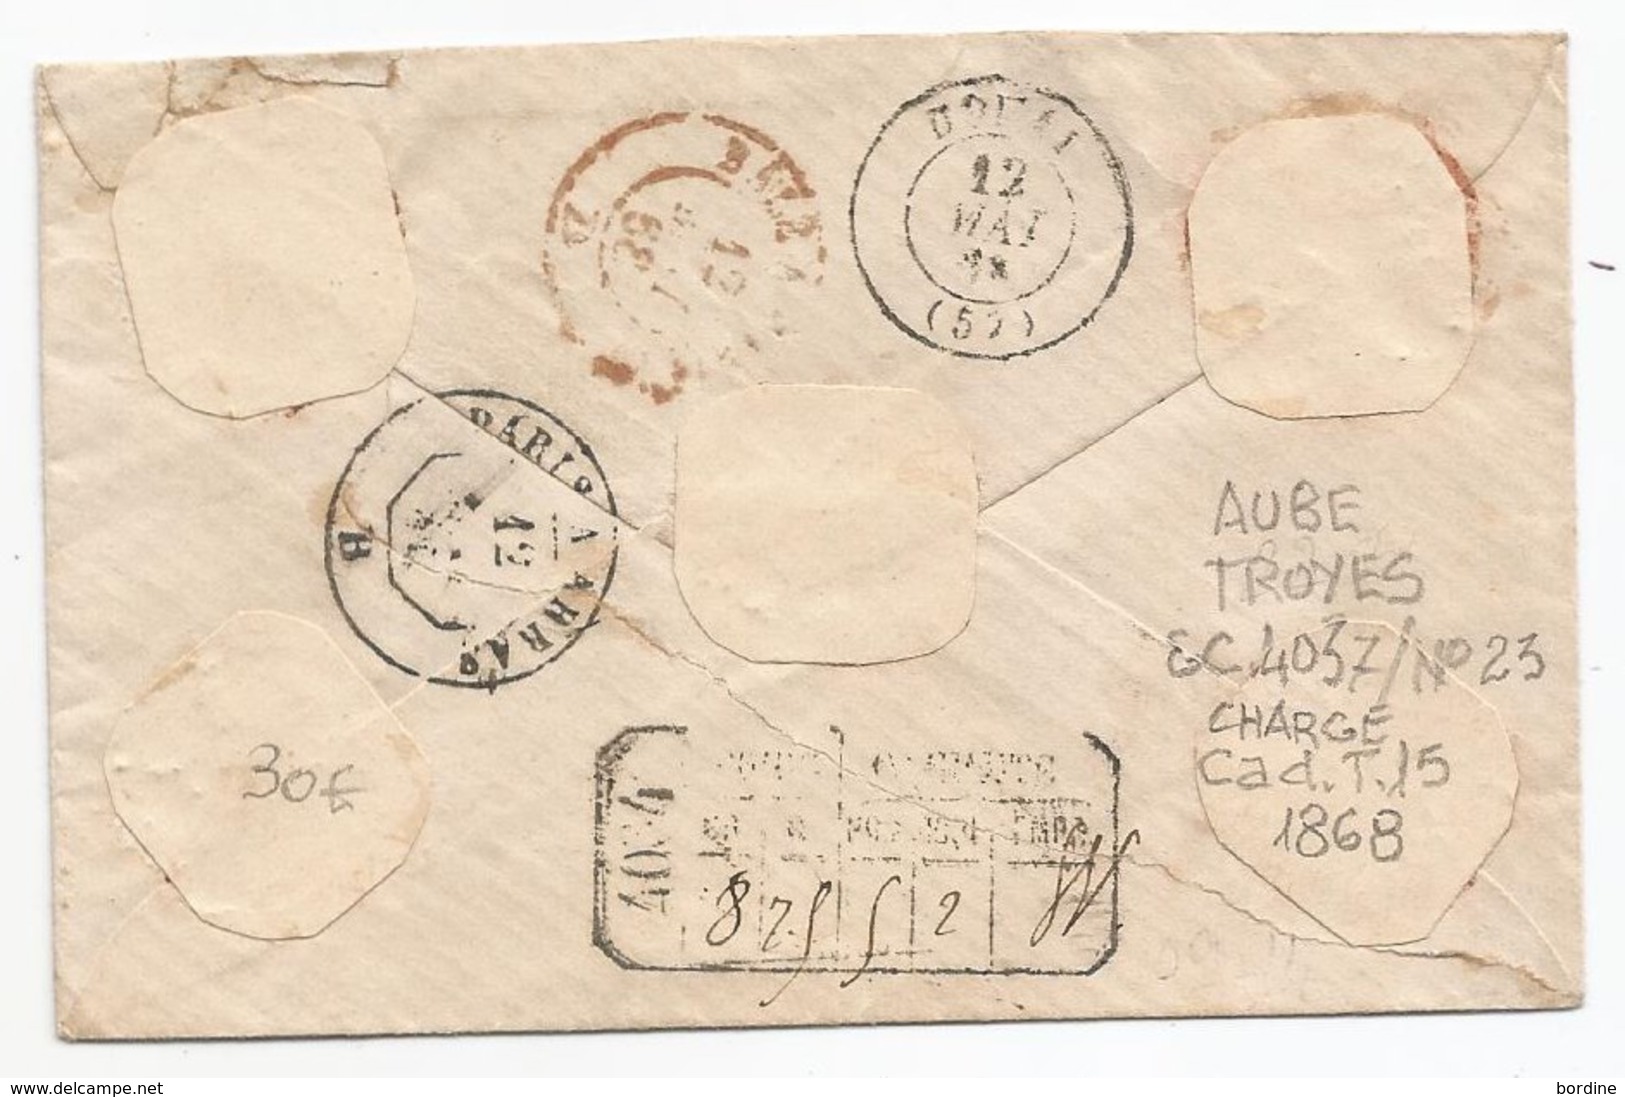 - Lettre - AUBE - TROYES - GC.4037 S/TP Napoléon III N°23 - CHARGE Rouge - Càd T.15 - 1868 - 1862 Napoleon III